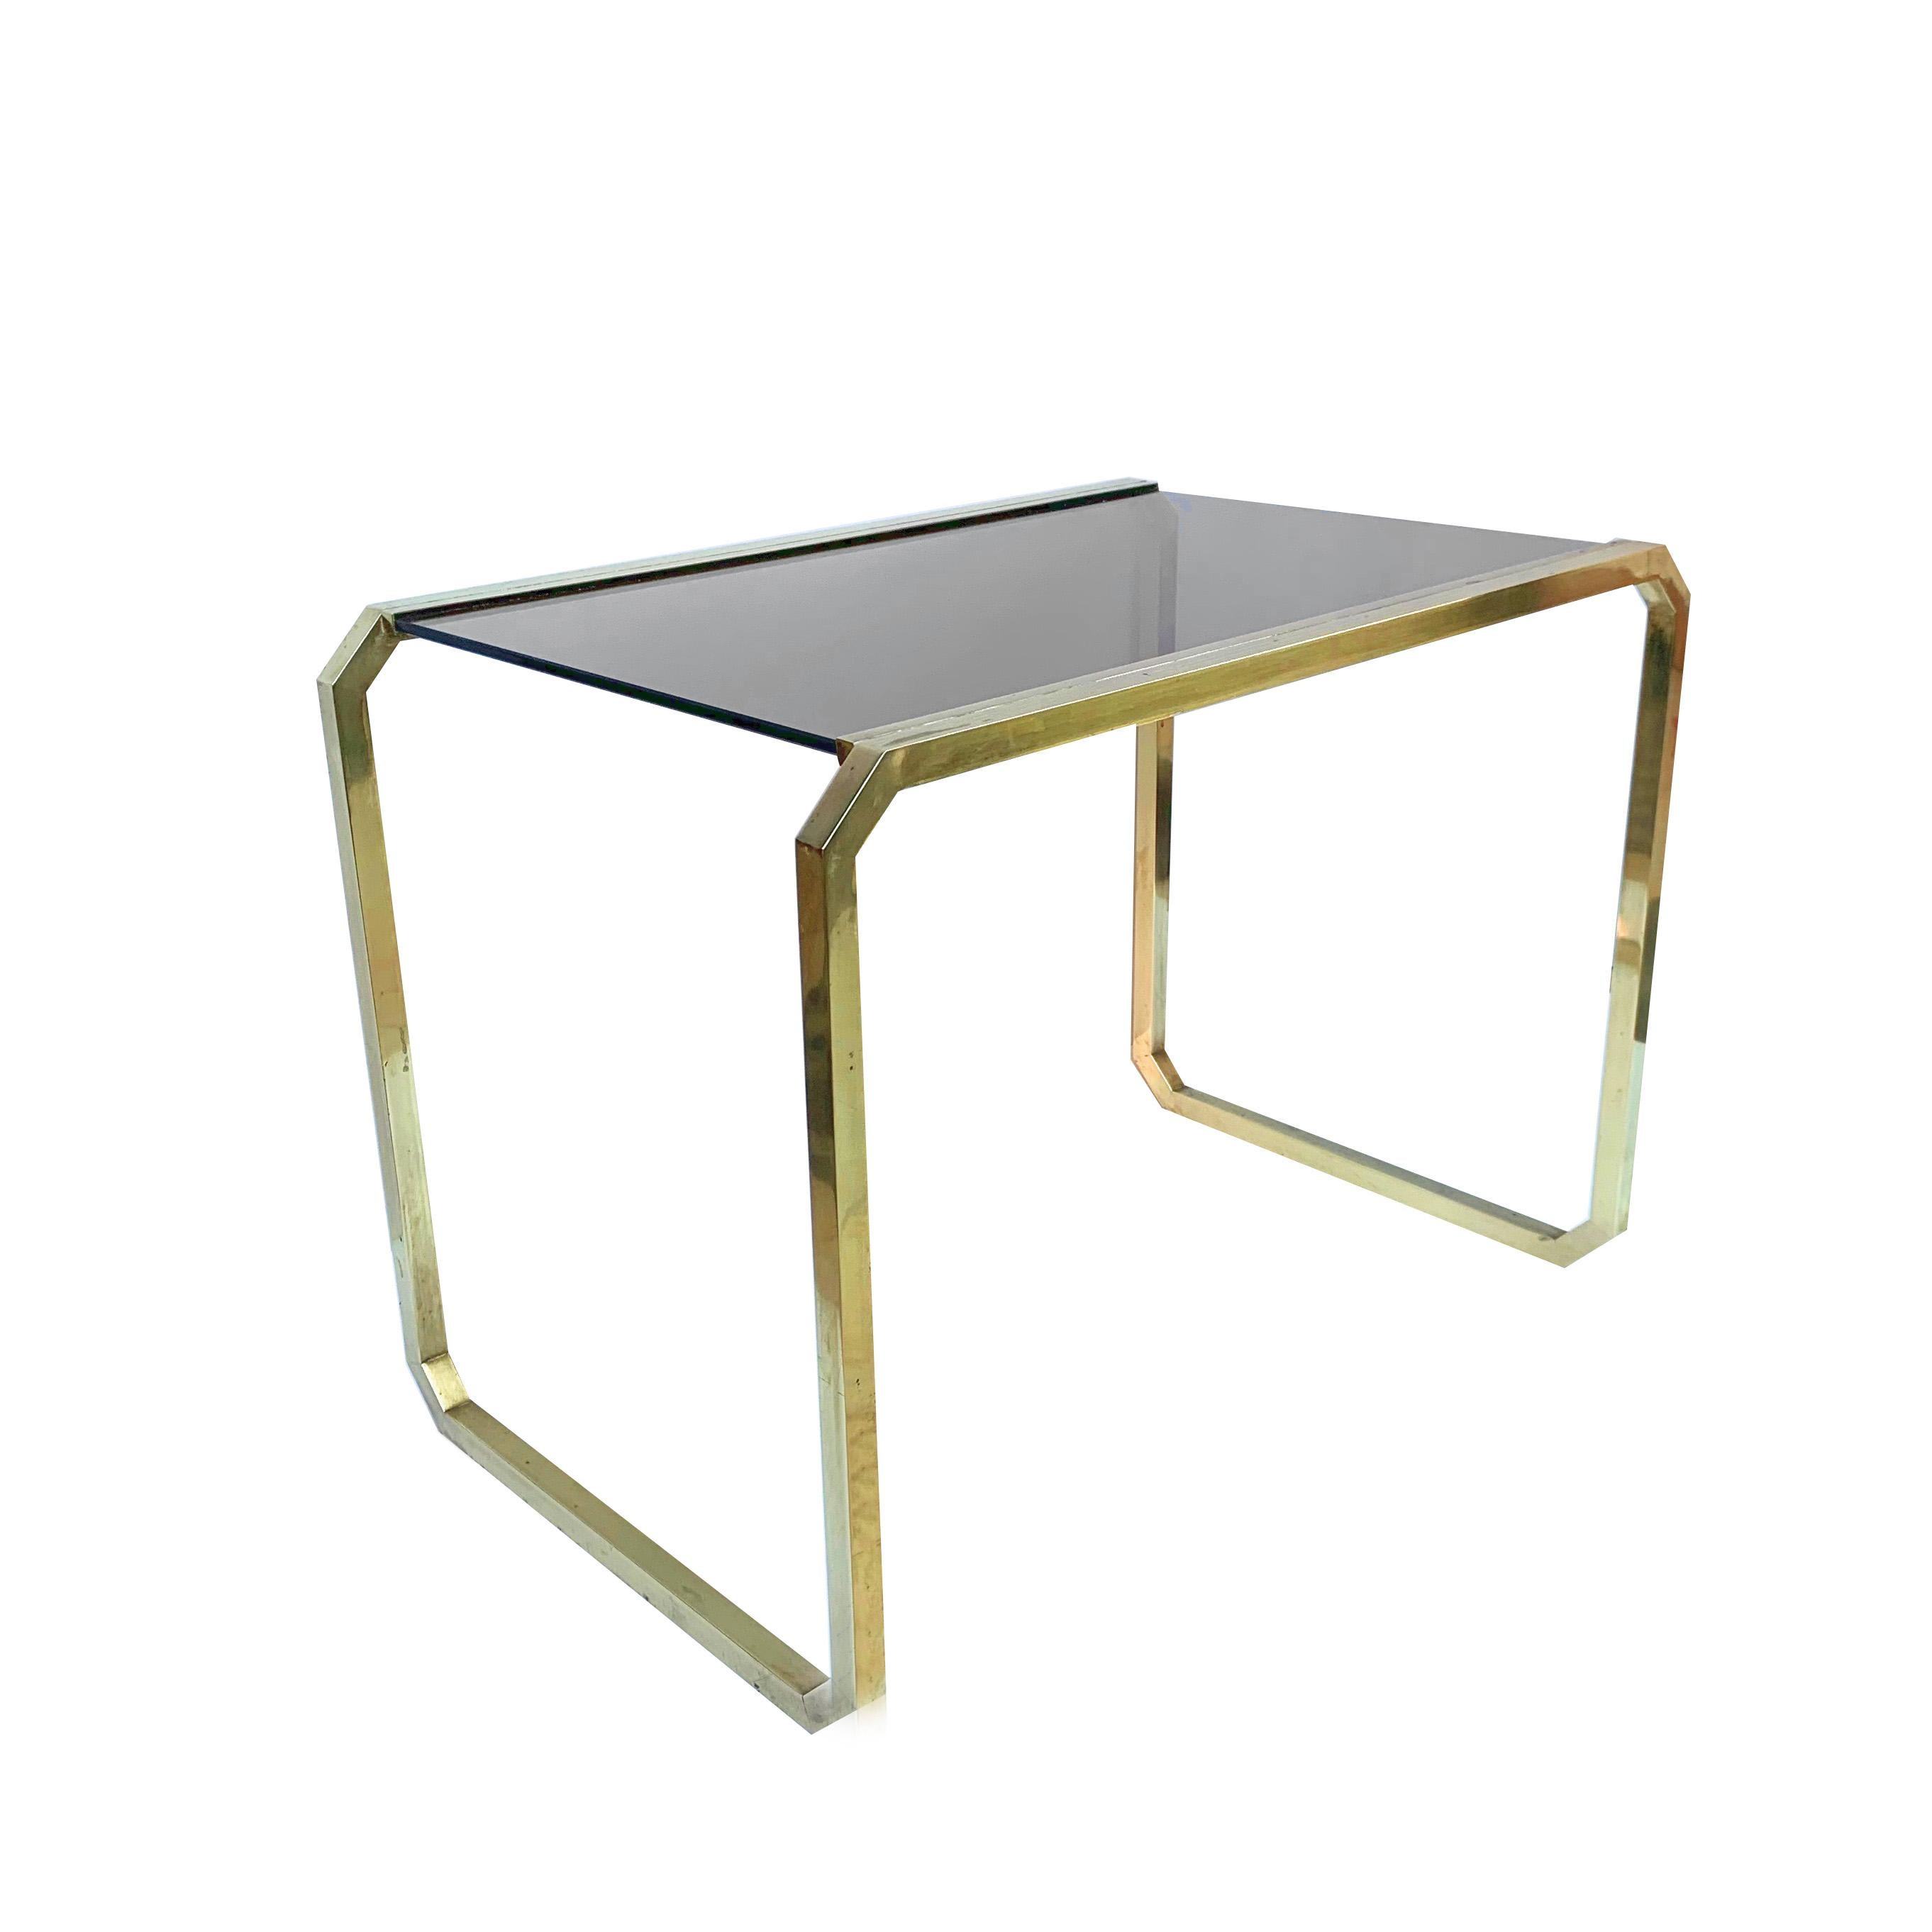 Romeo Rega style Coffee Table in Brass and Smoked Glass, Italy, 1970s Midcentury In Fair Condition For Sale In Roma, IT